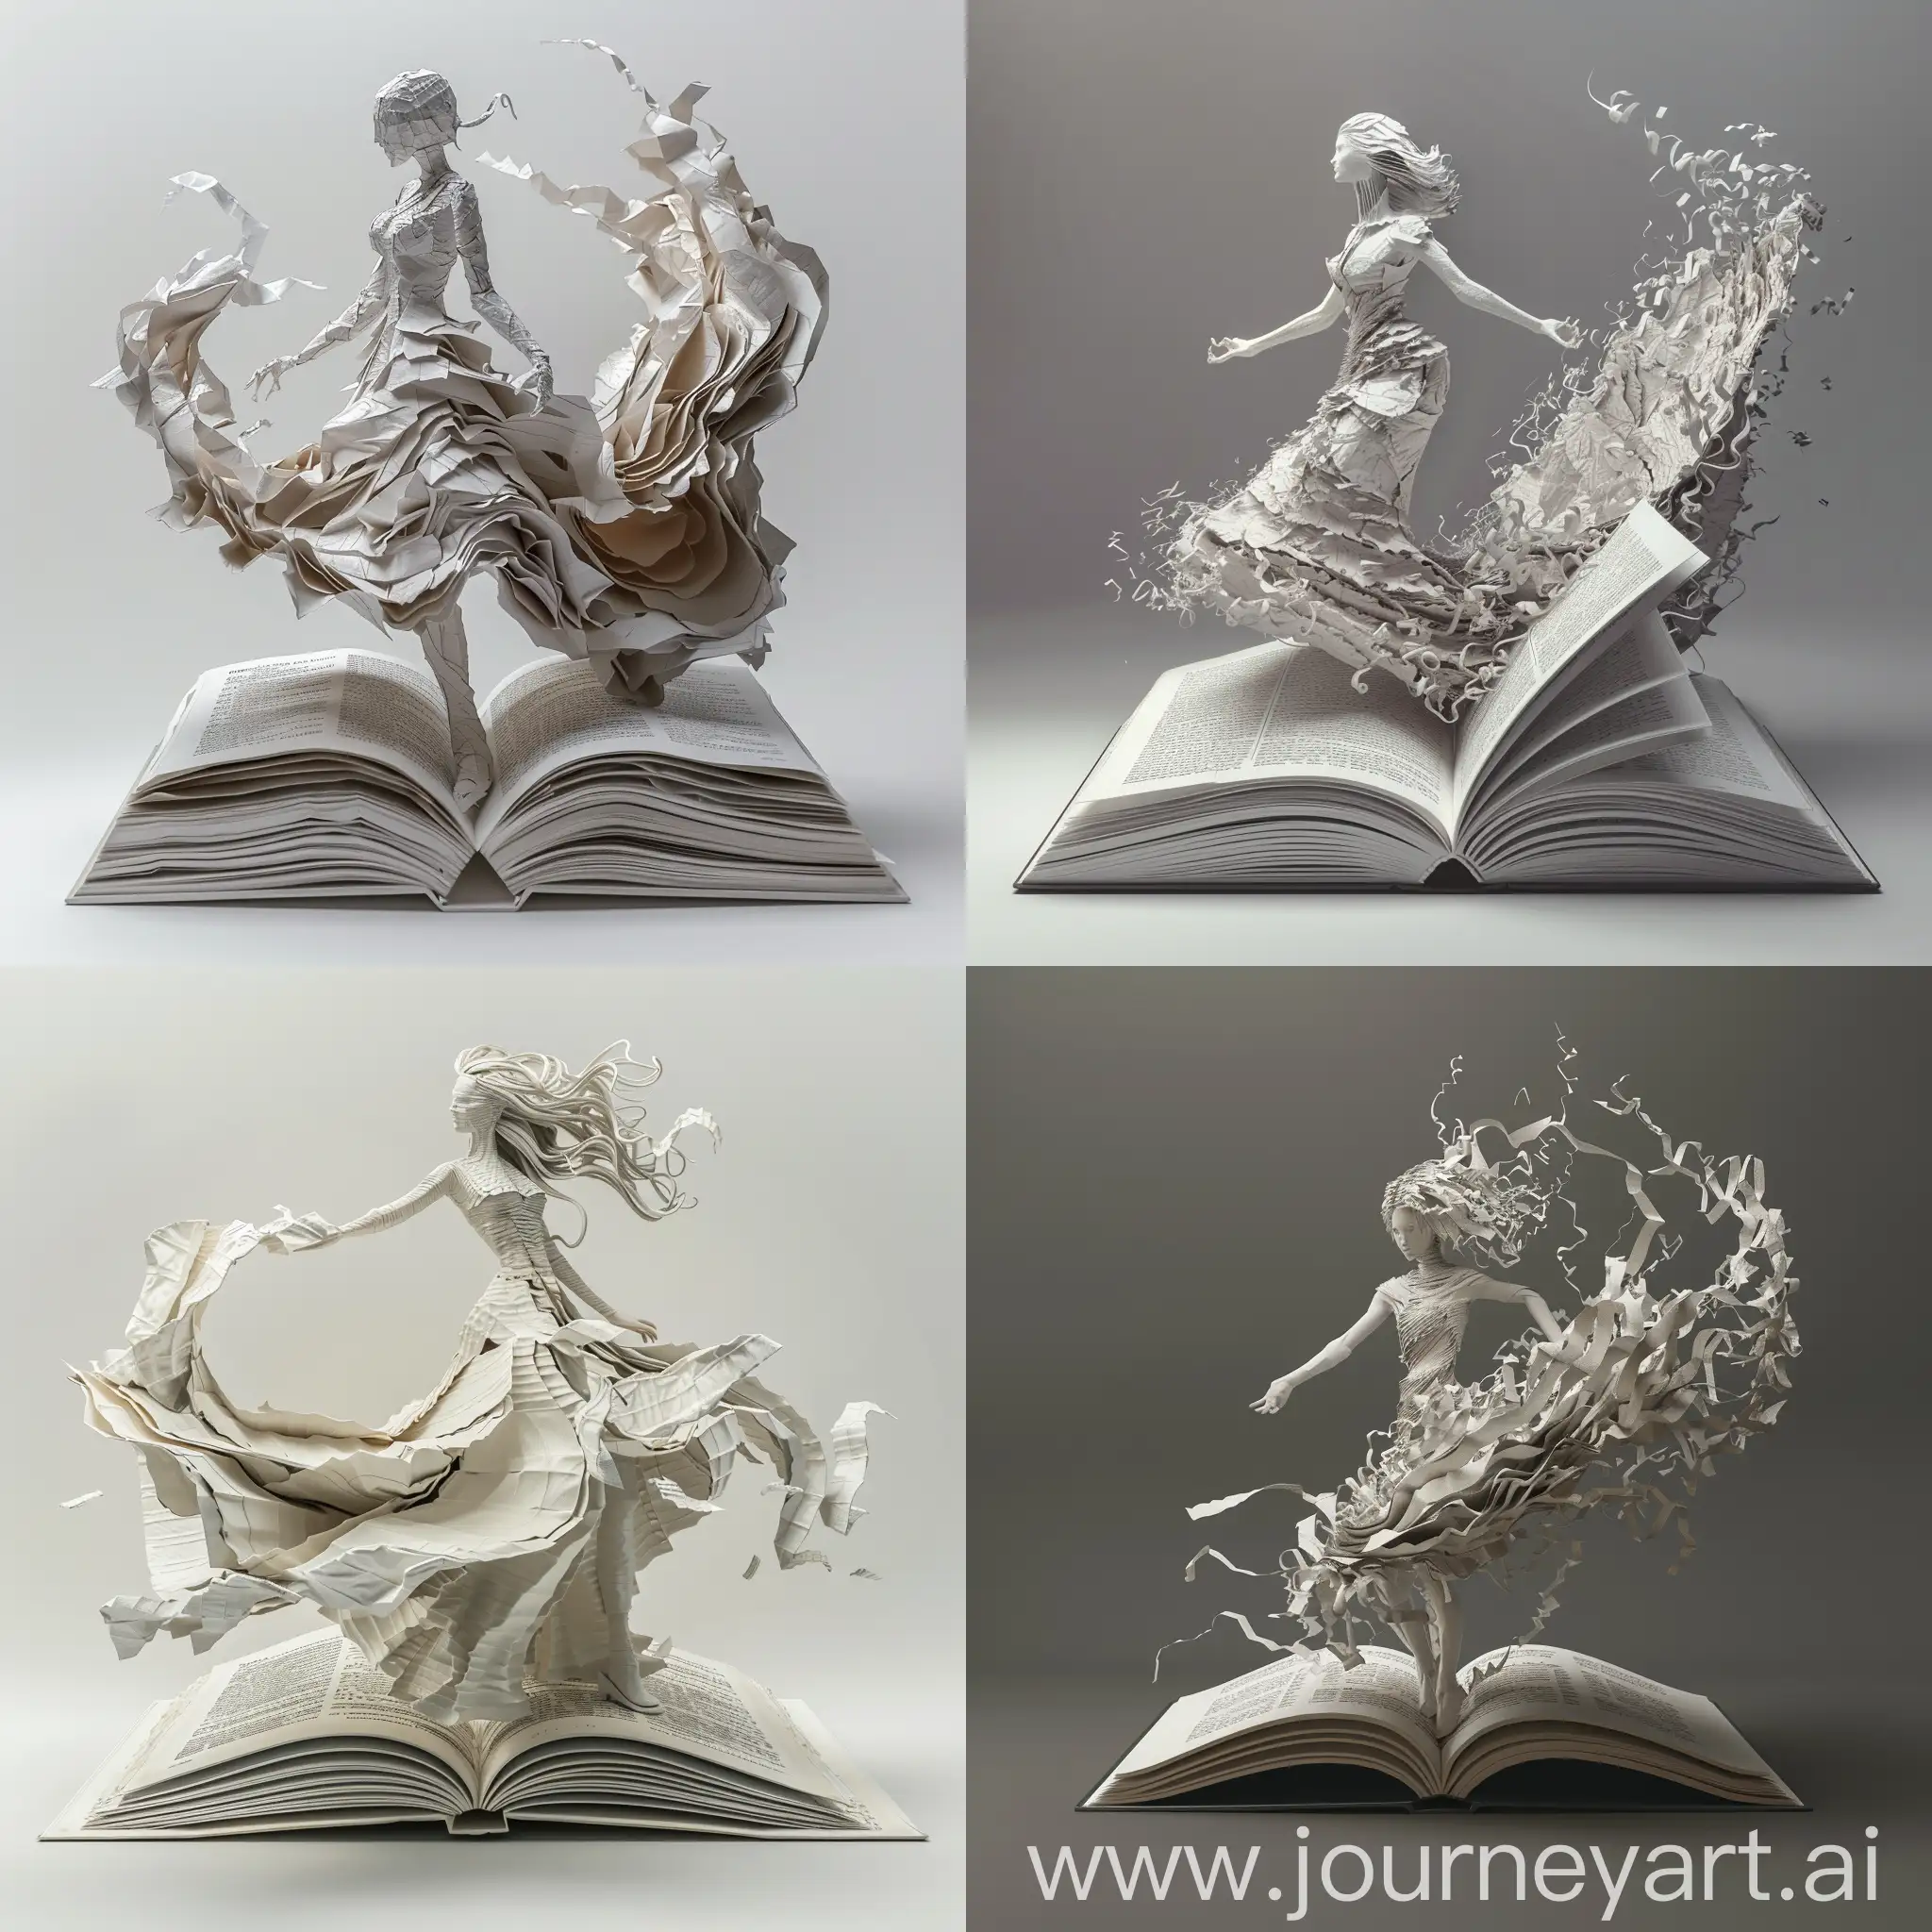 Create a detailed 3D render of a woman made of paper, emerging from an open book. Her dress is crafted from a single sheet of the book's pages, curling and twisting upwards to form her attire as she steps out of the book. The book's pages are torn and dynamically displaced, enhancing the sense of movement and liberation. The scene should capture the unique interaction between the two-dimensional book and the three-dimensional paper figure, emphasizing the intricate origami-style dress that seamlessly flows from the book. The entire composition should highlight her dramatic emergence with a focus on texture, detail, and the surreal contrast between the still book and her dynamic, paper-crafted form.